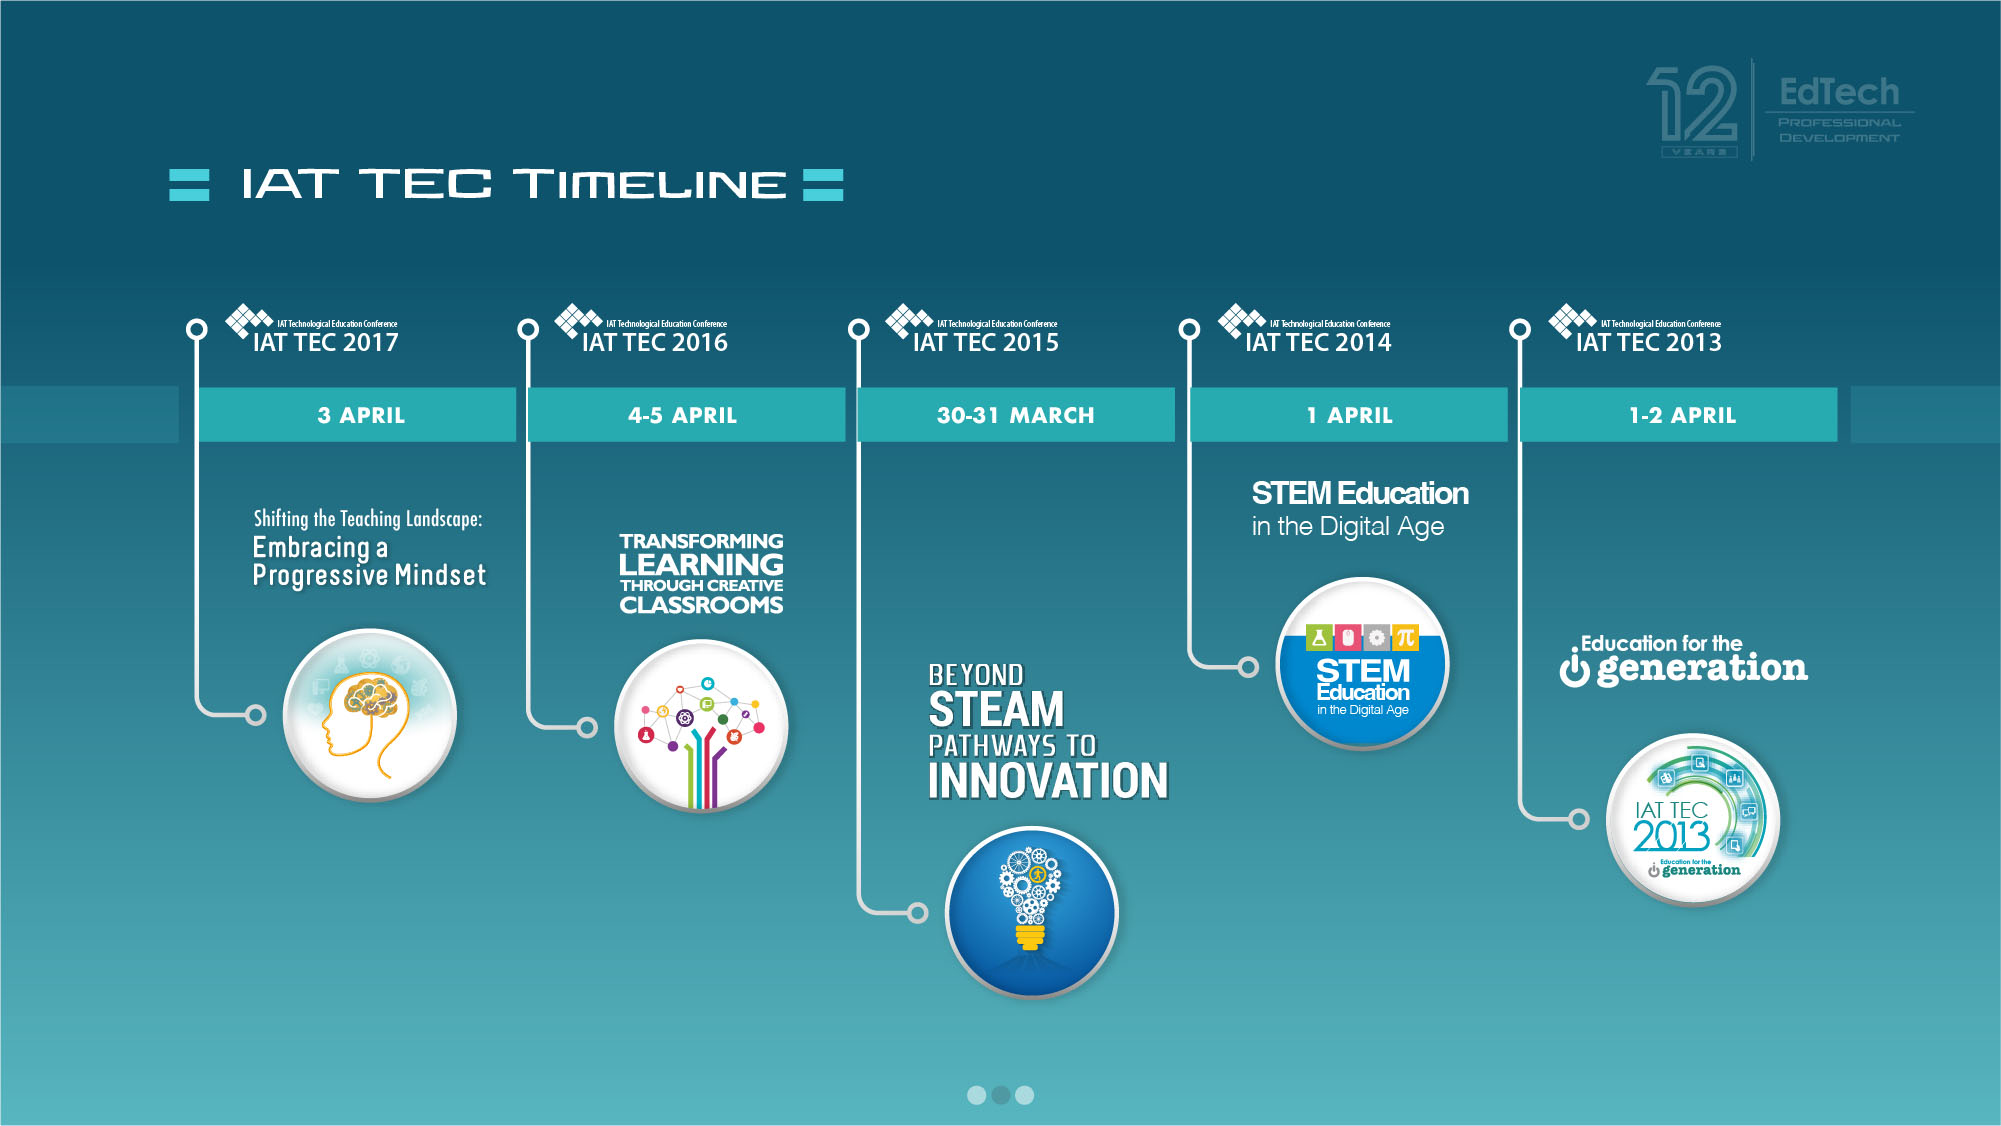 Time line 2 